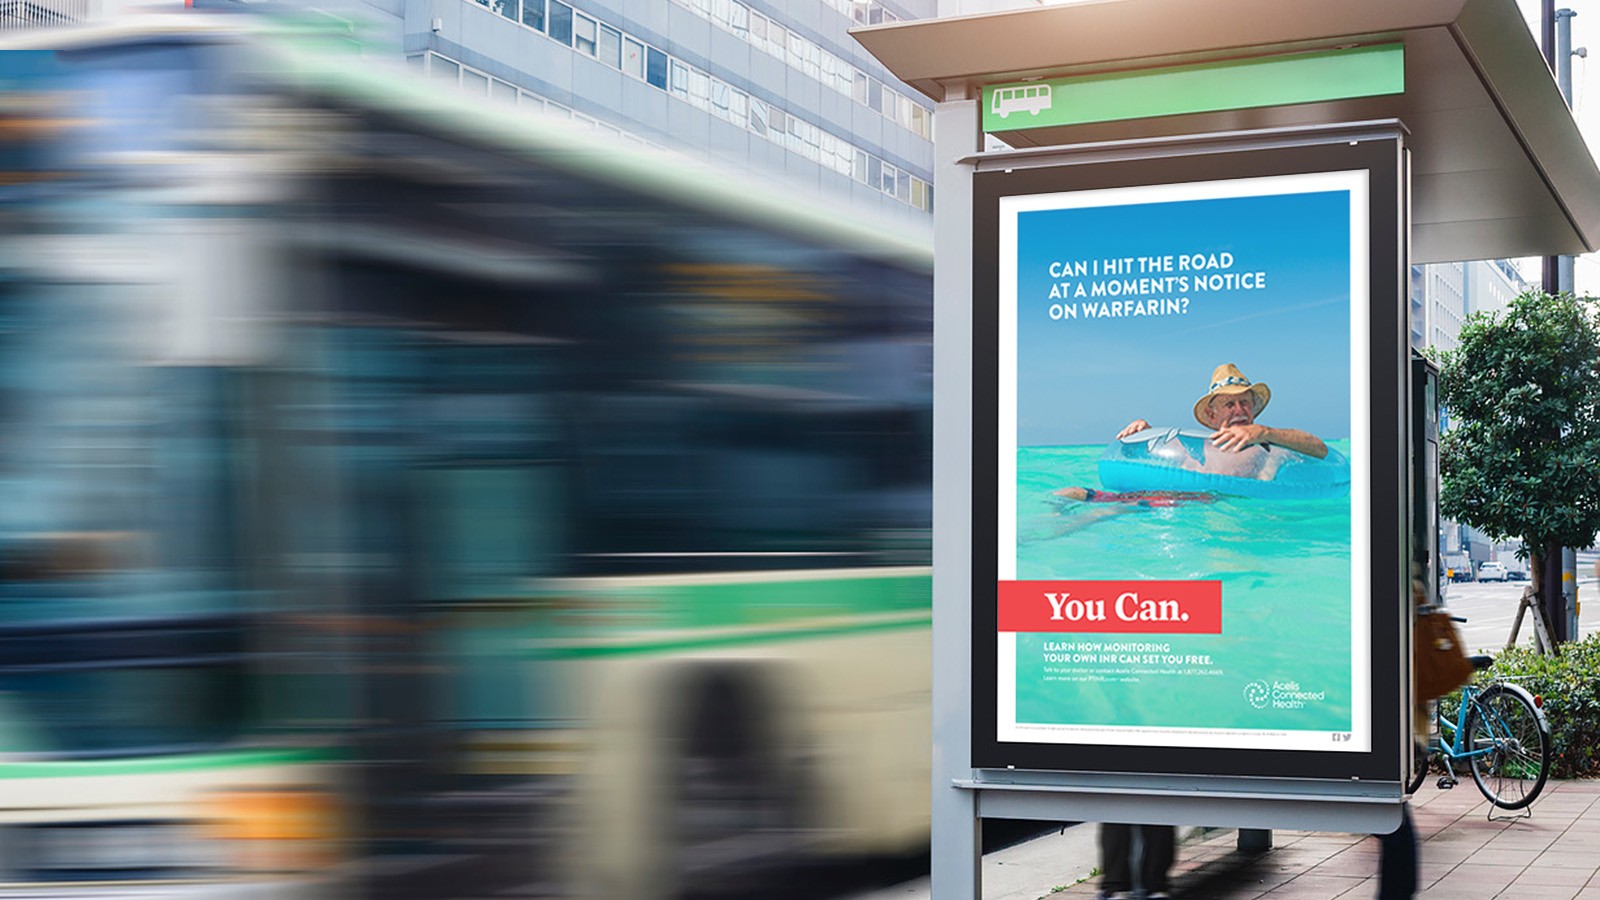 ACELIS CONNECTED HEALTH "YOU CAN" CAMPAIGN